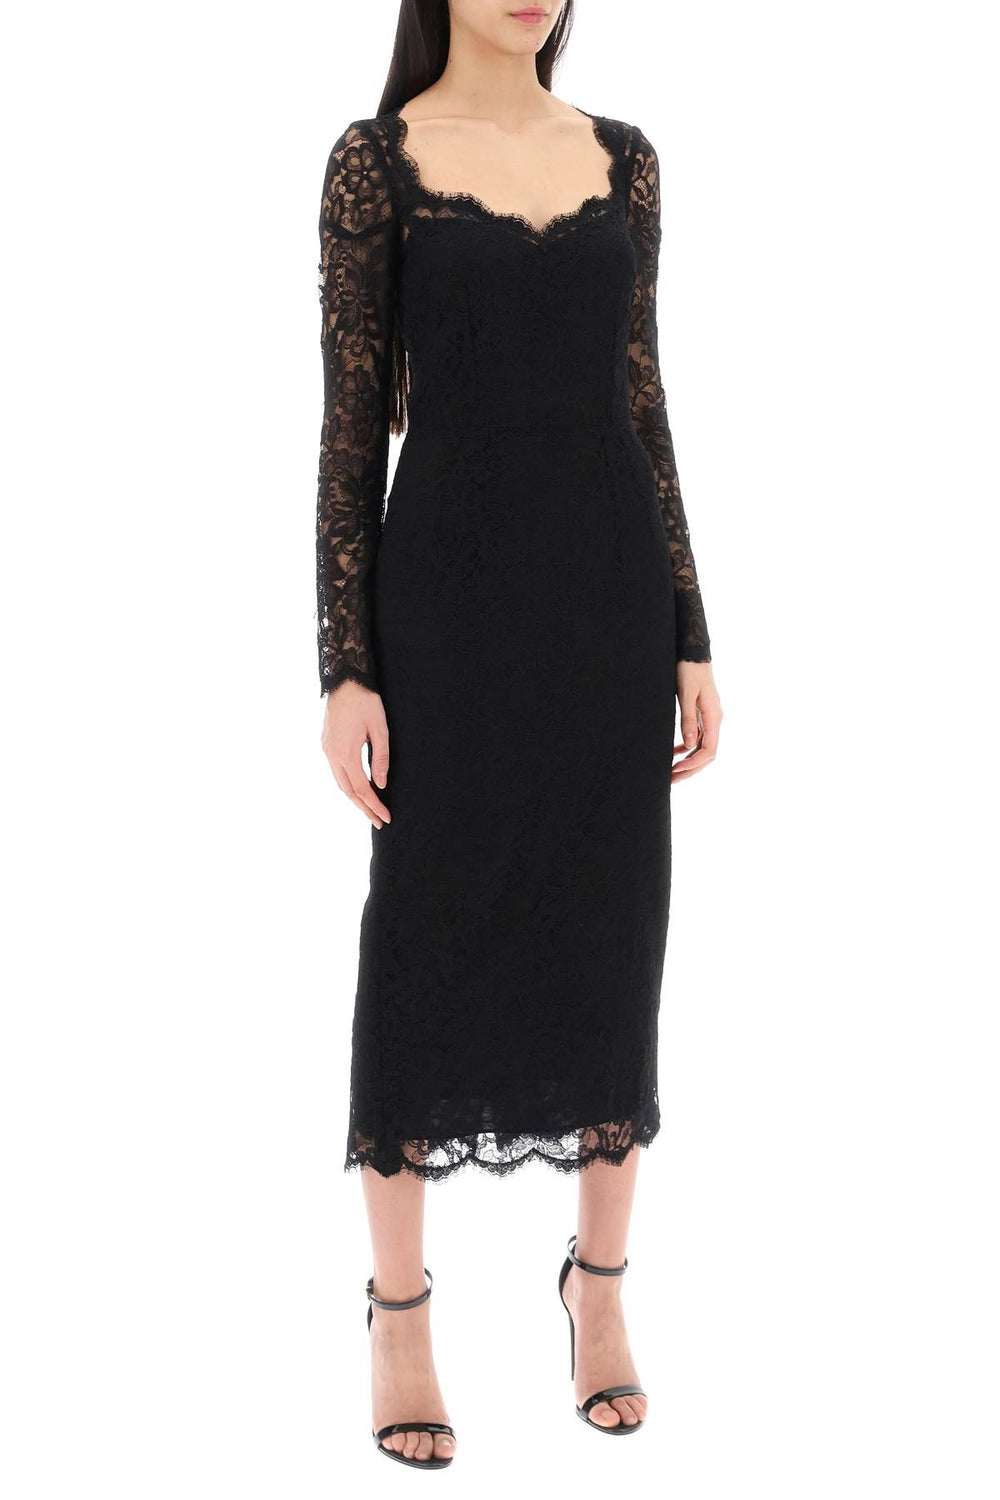 midi dress in floral chantilly lace-1